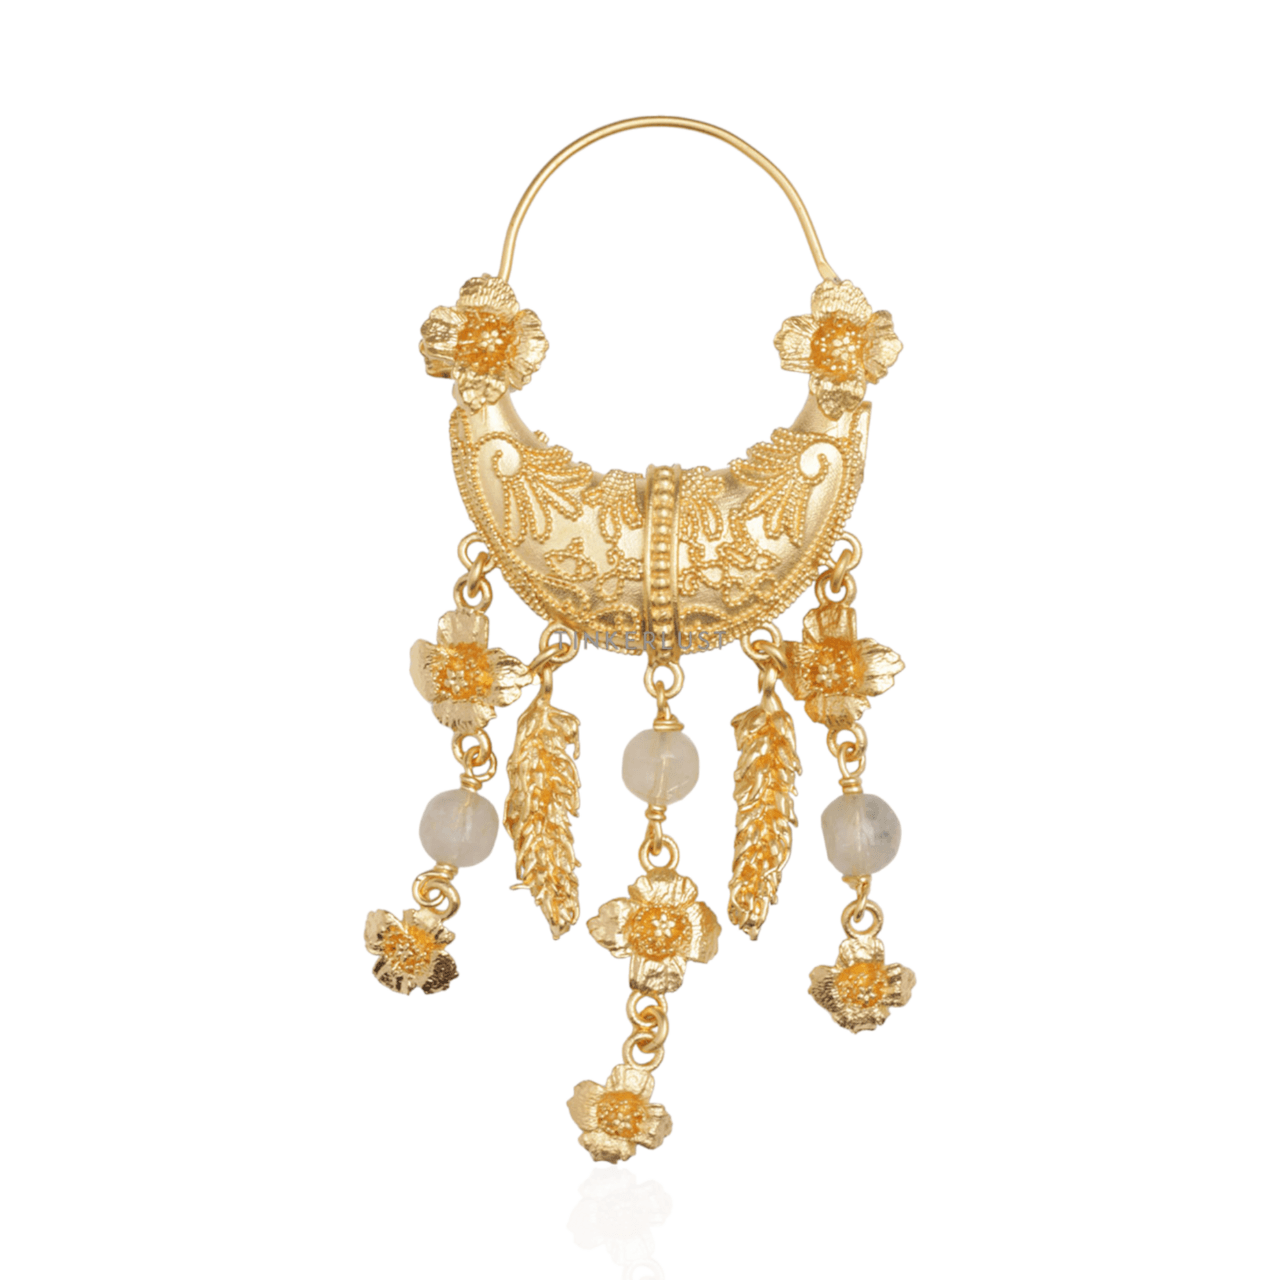 Christian Dior Mille Fleurs De Dior Earring in Gold-Finish Metal with Transparent Glass Beads Jewellery